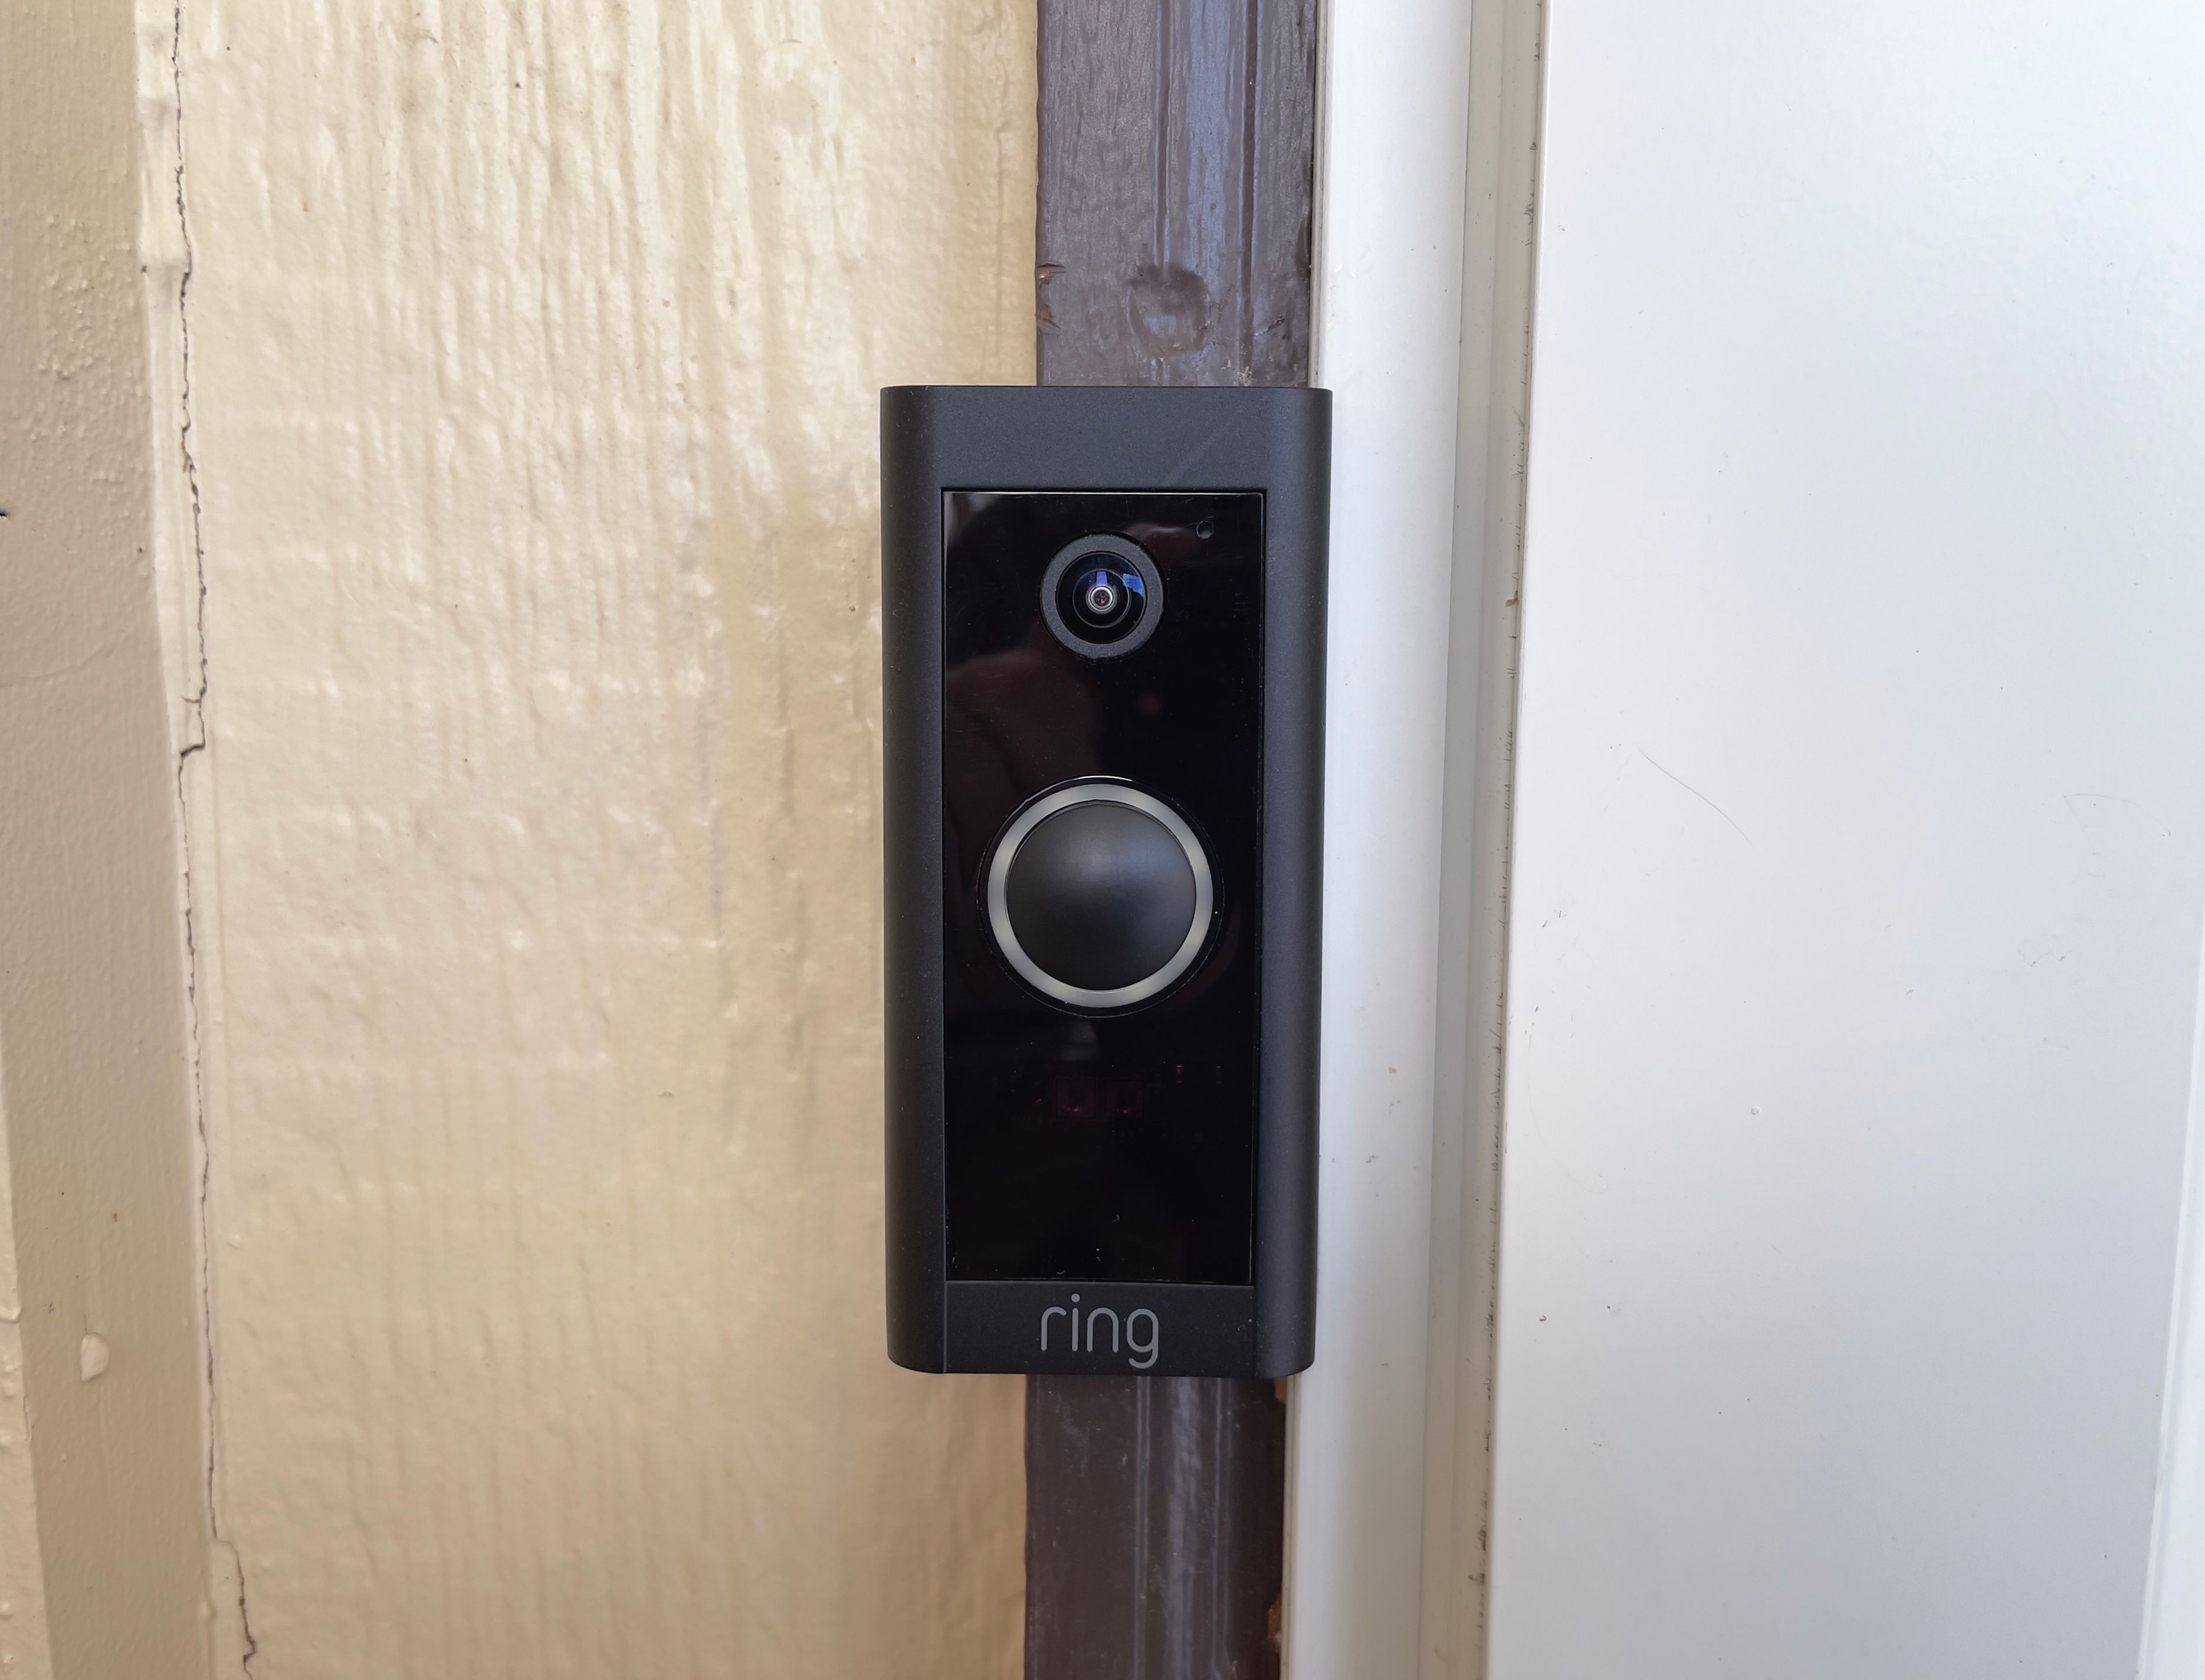 How to Remove Faceplate from Ring Doorbell Wired 